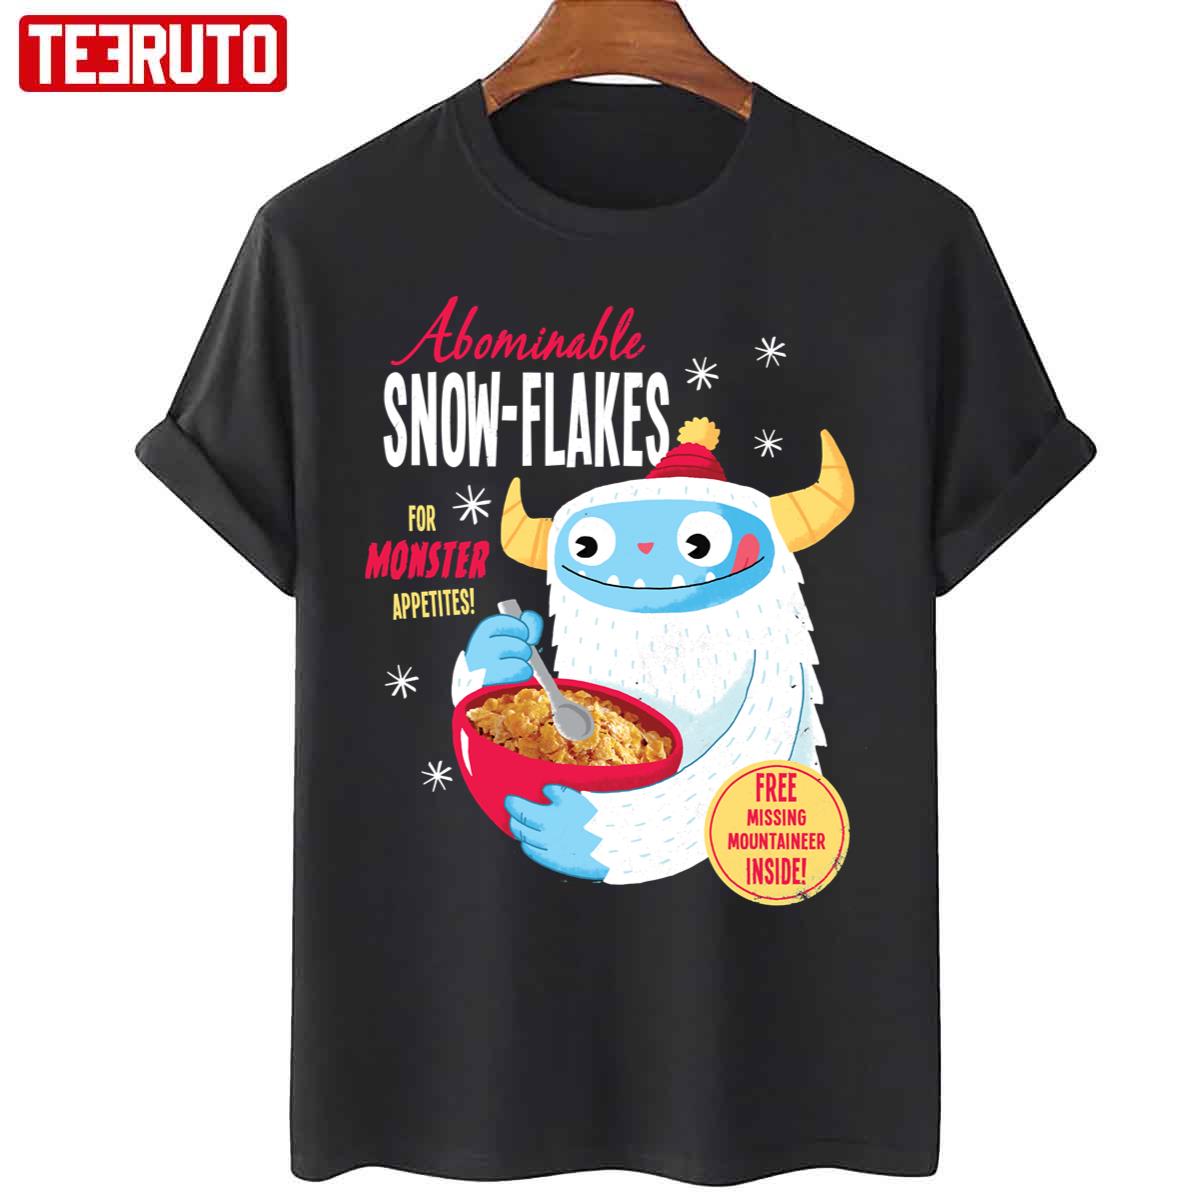 Abominable Snowflakes Unisex T-Shirt